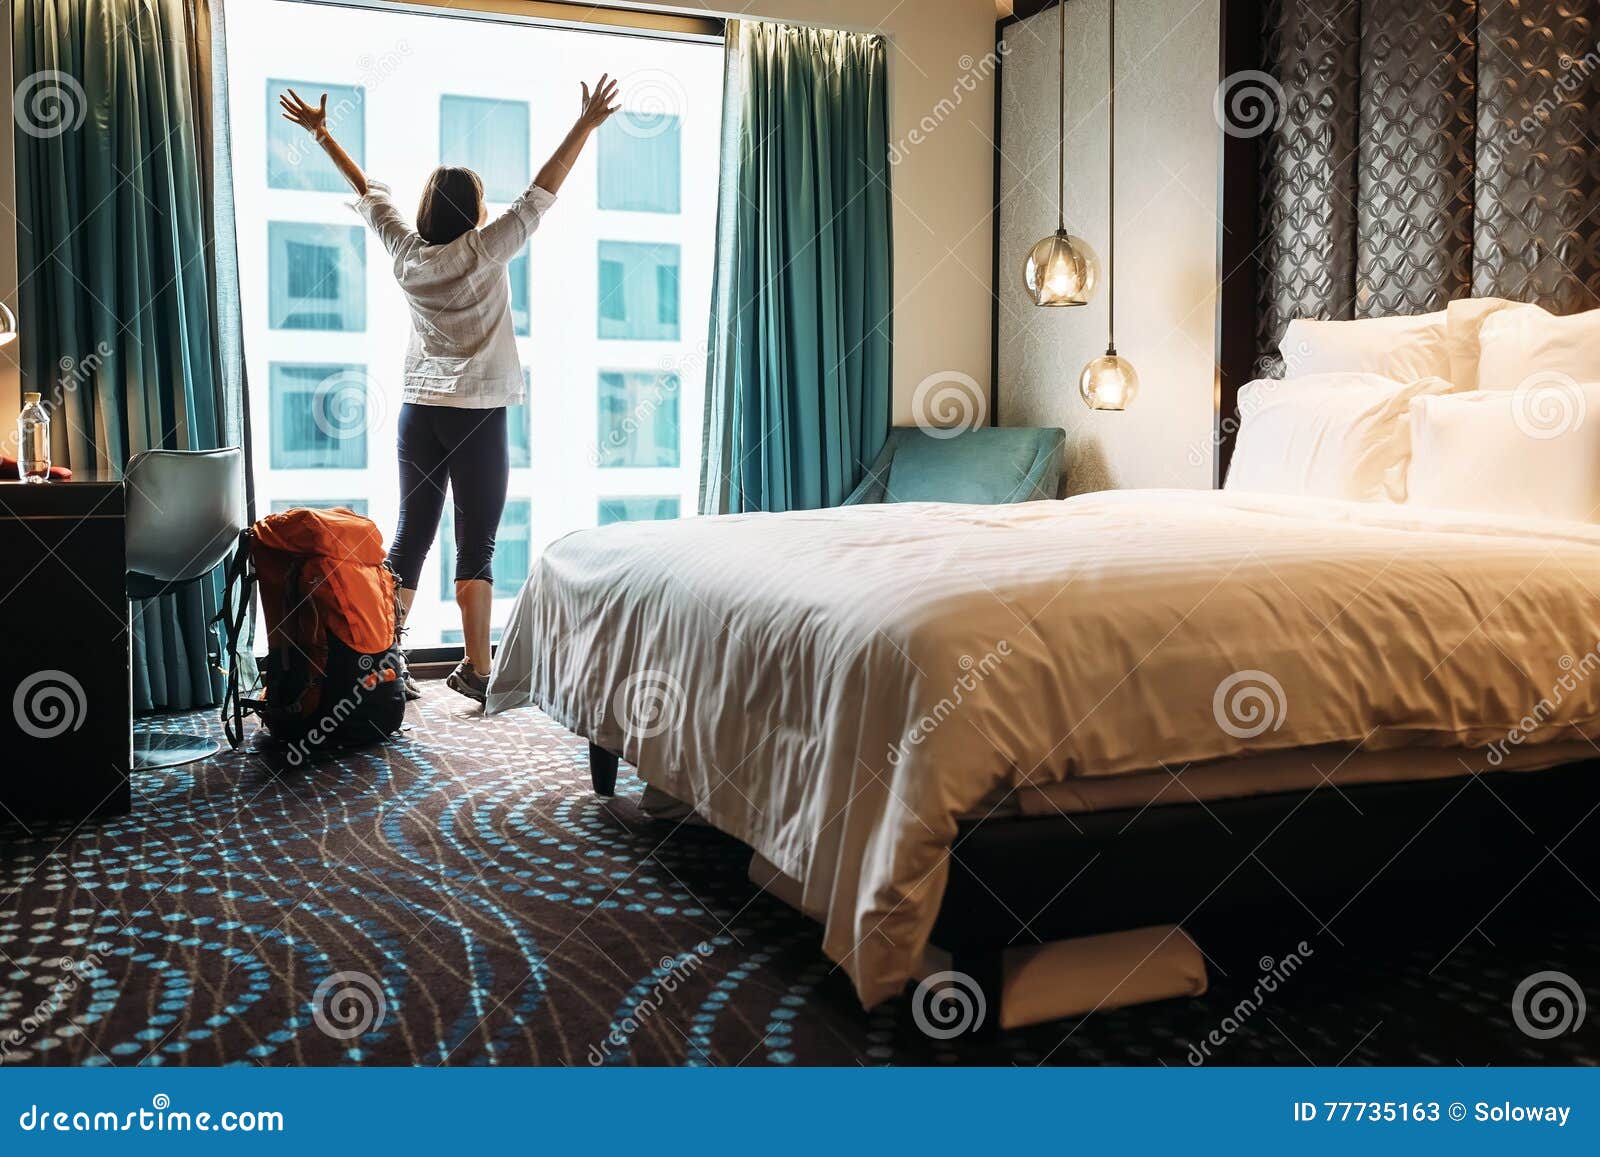 backpacker traveller happy to stay hotel